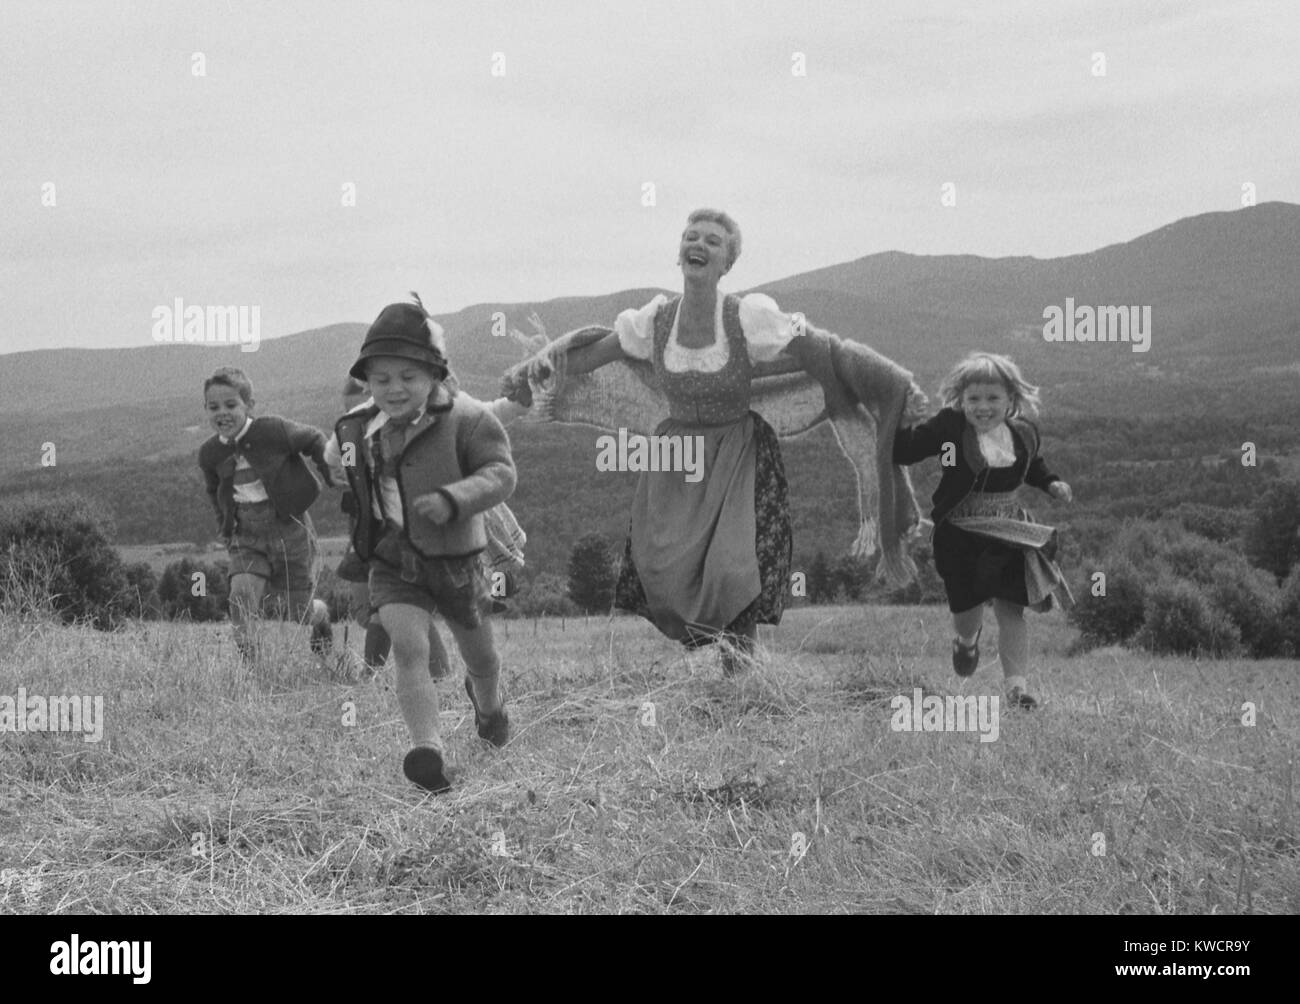 Mary Martin with children in mountain landscape. Martin played the leading role, Maria, in the Broadway musical 'The Sound of Music'. 1959 photo by Toni Frissell. - (BSLOC 2014 17 75) Stock Photo